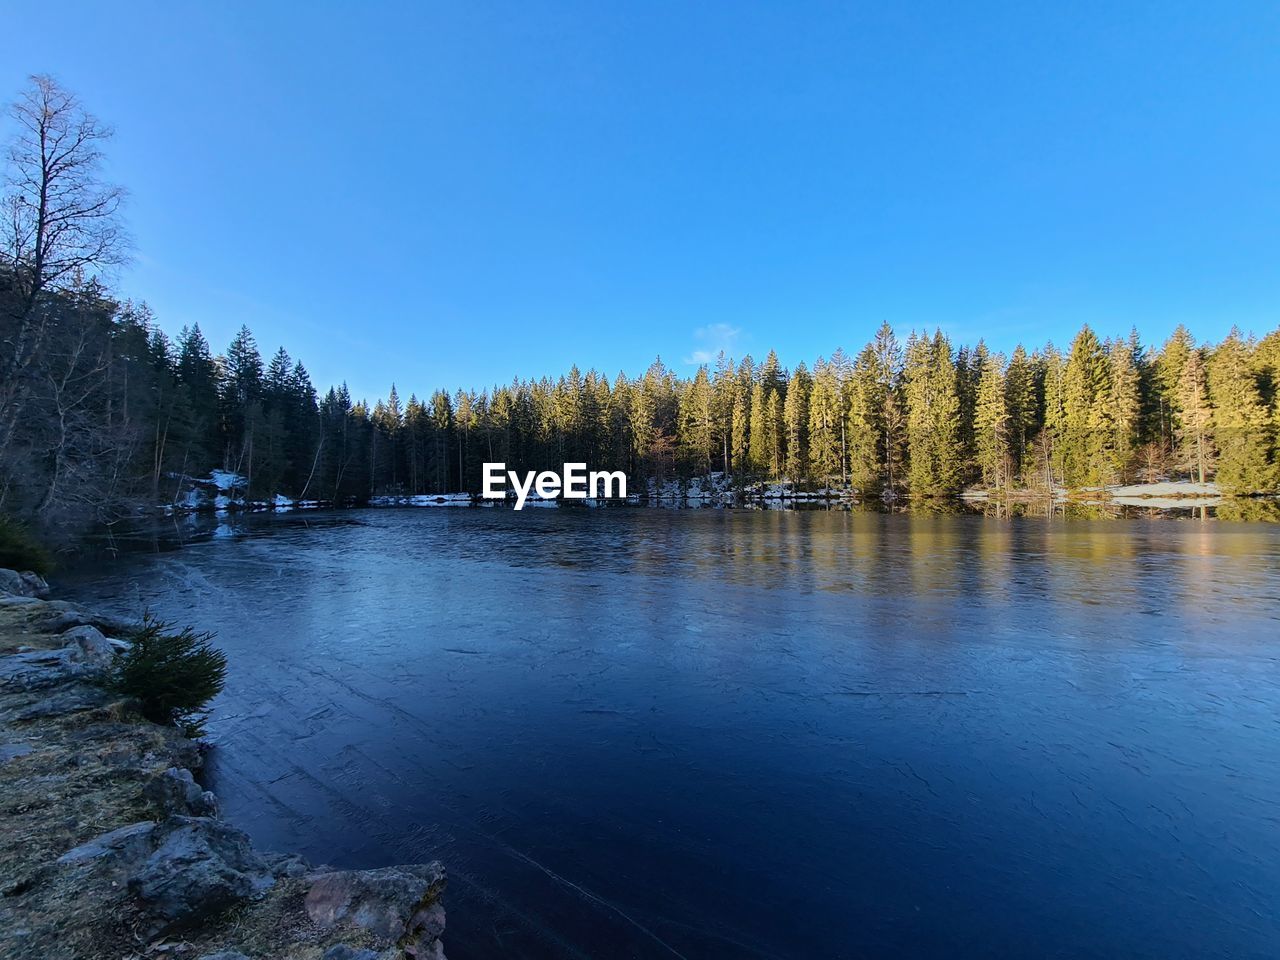 SCENIC VIEW OF LAKE IN FOREST AGAINST BLUE SKY